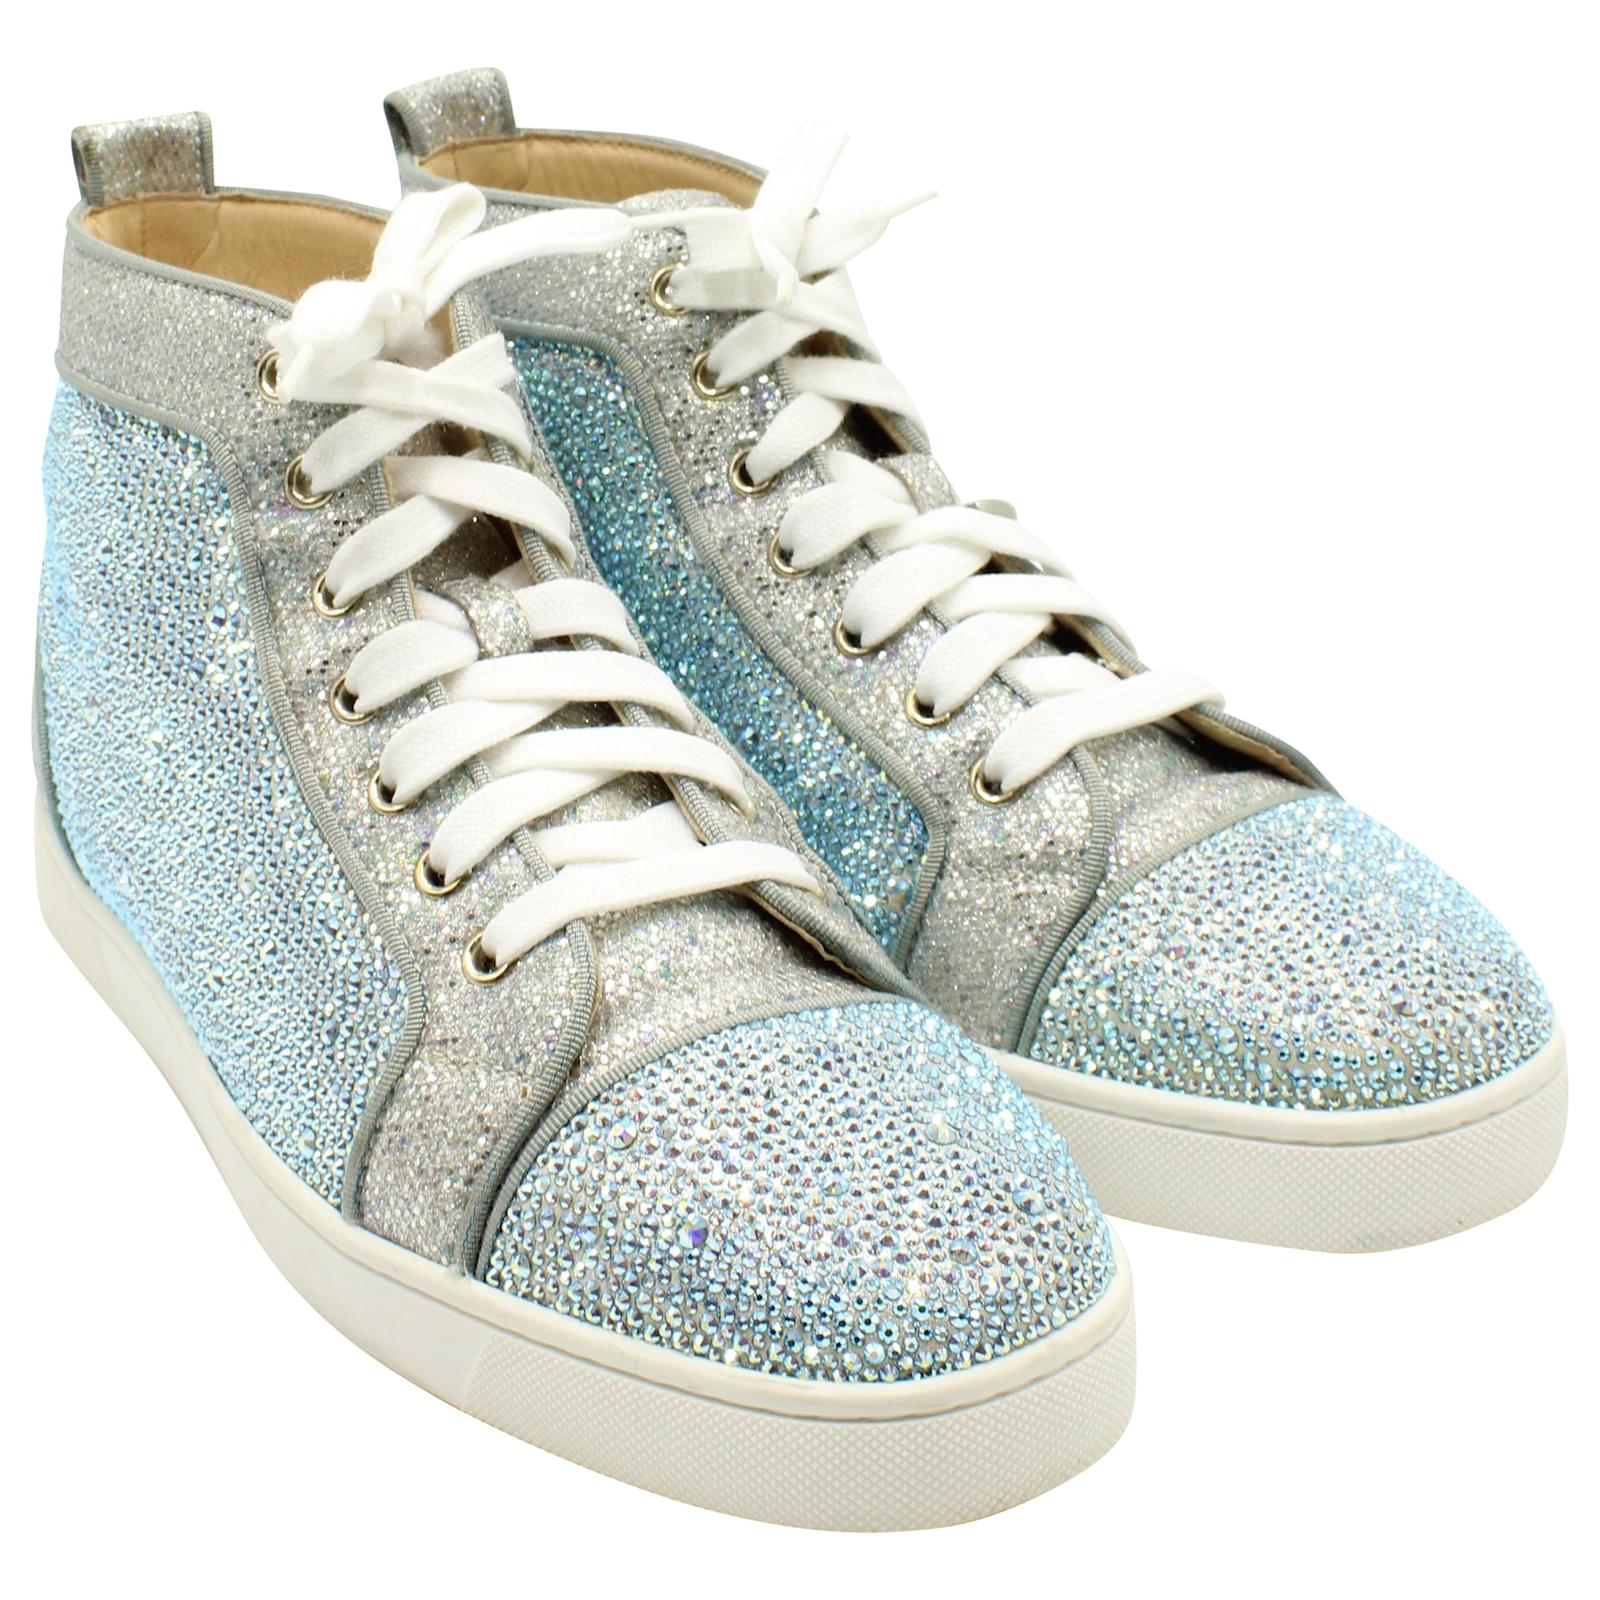 Christian Louboutin Suede Louis Strass High-Top Sneakers